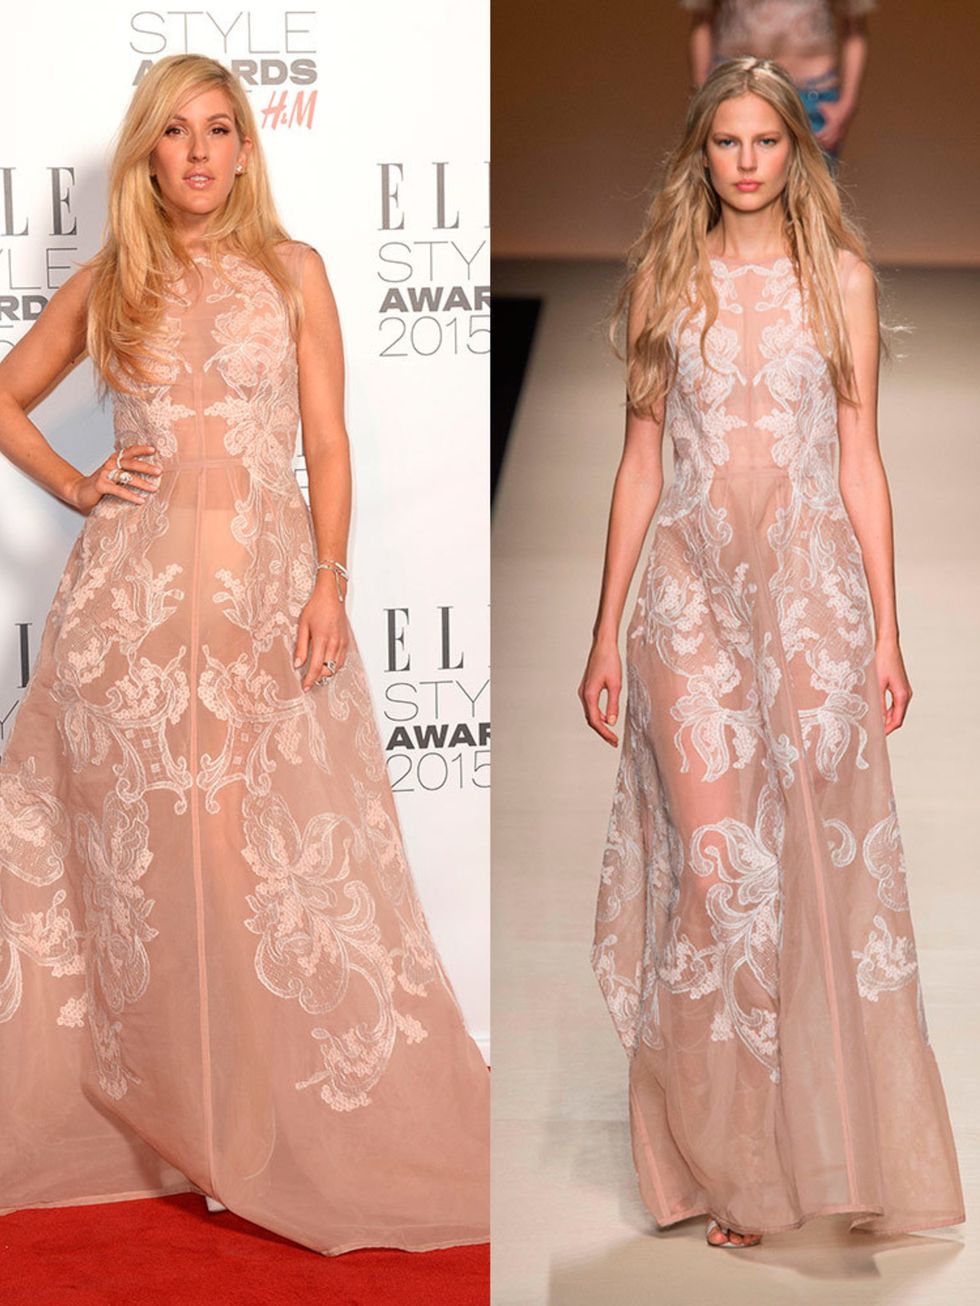 Ellie Goulding wears Alberta Ferretti Spring 2015 gown at the 2015 Elle Style Awards, February 2015.